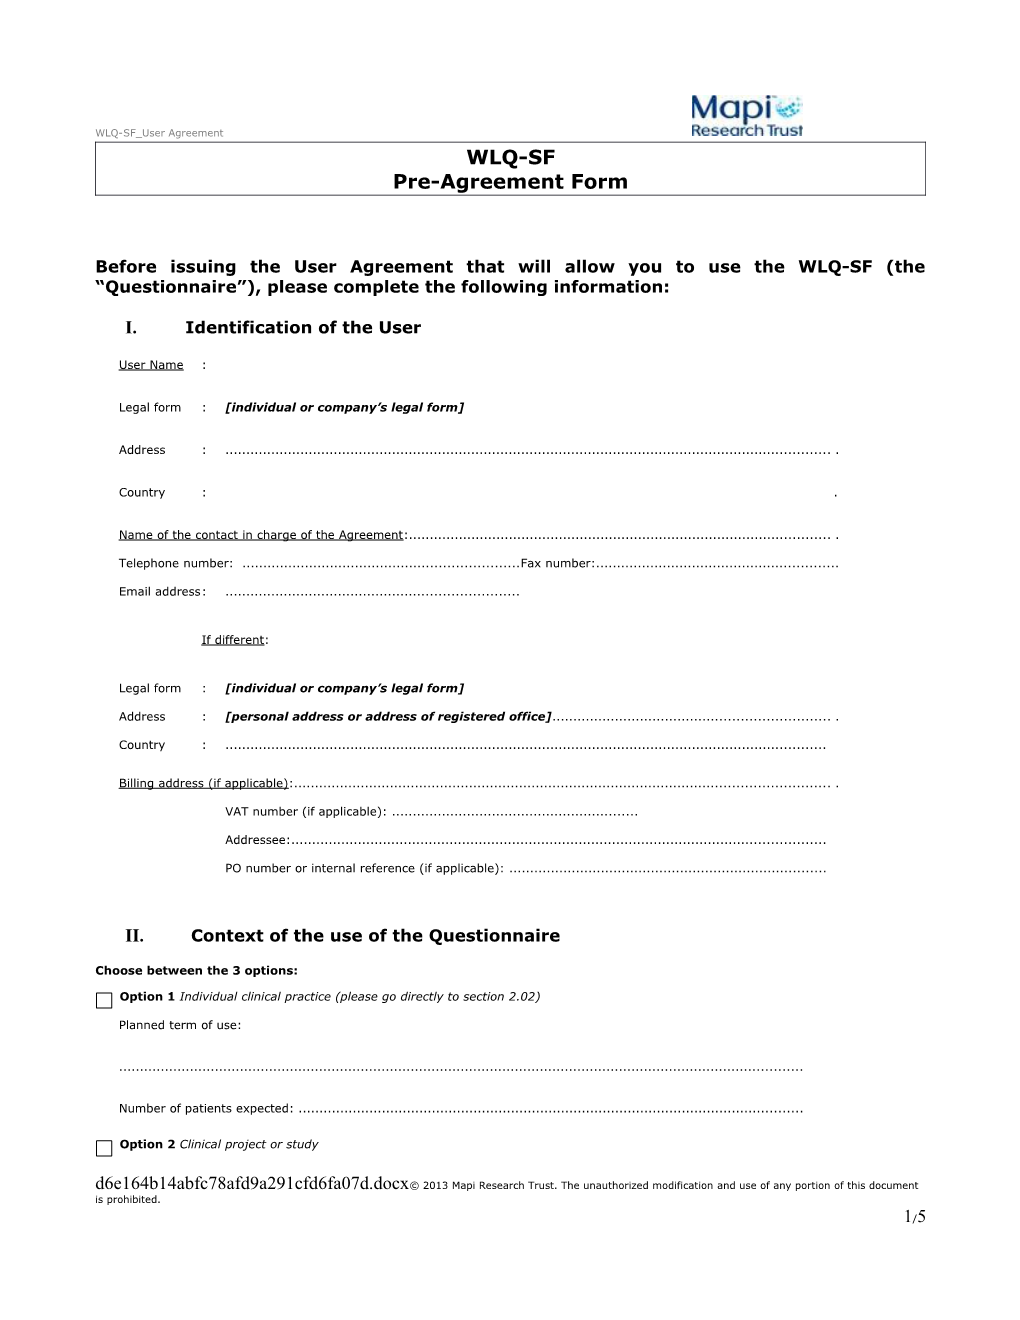 Pre-Agreement Form